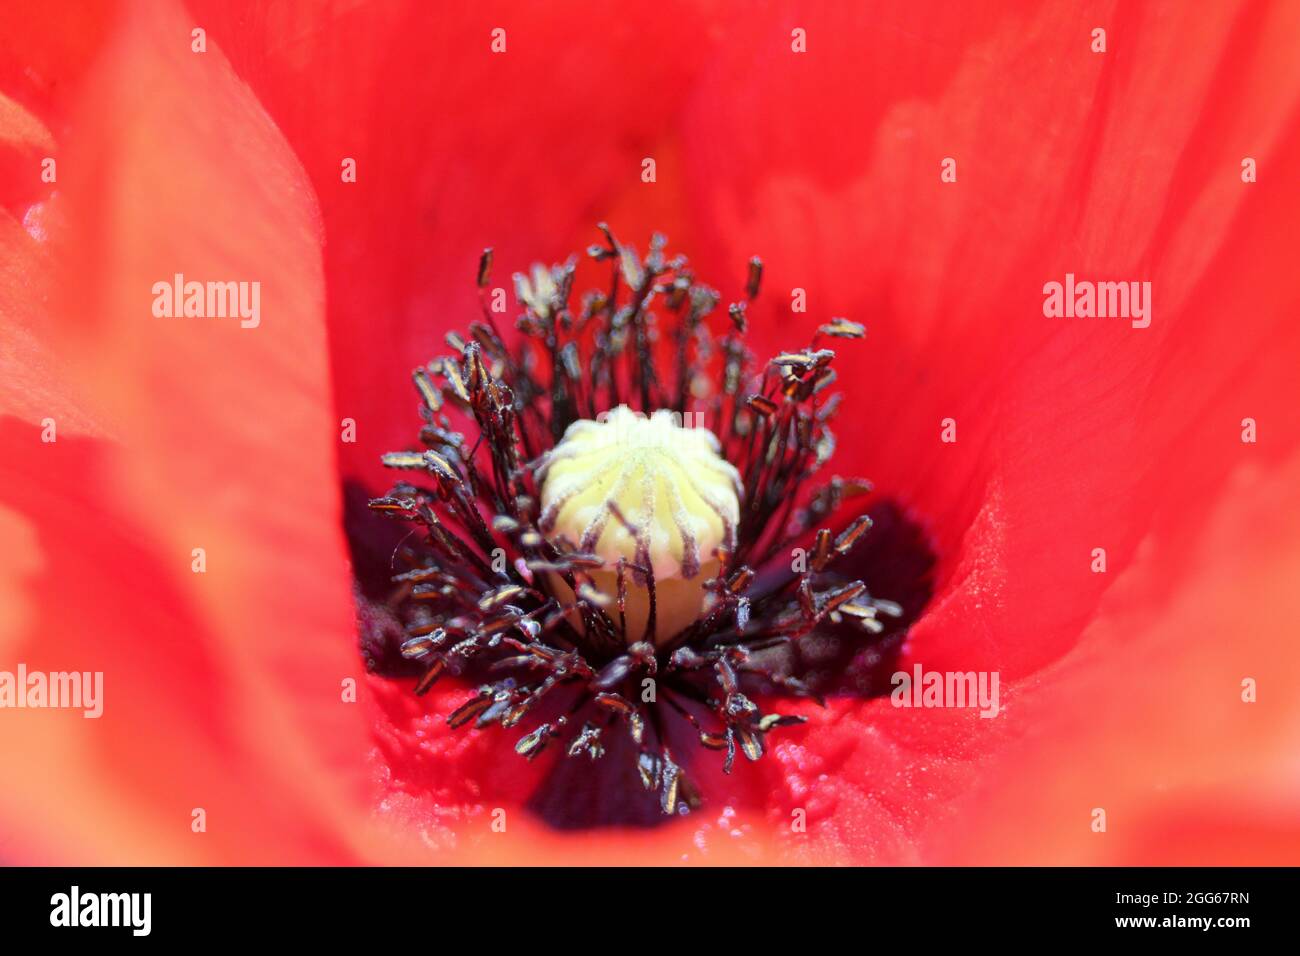 A close up photograph of a vibrant red poppy flower in a garden Stock Photo